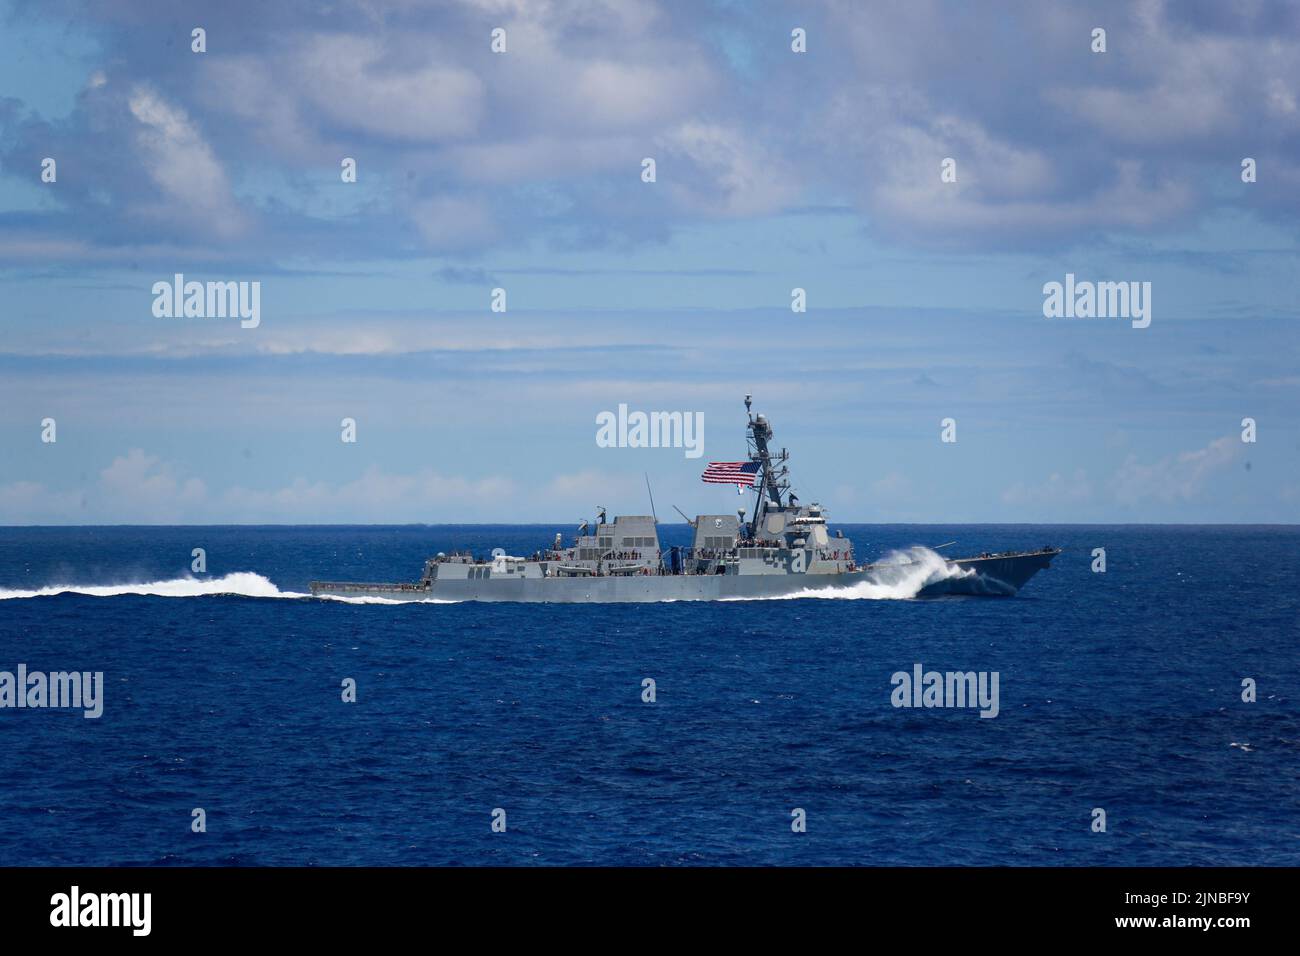 Pacific Ocean, United States. 09 August, 2022. The U.S. Navy Arleigh burke-class guided-missile destroyer USS Spruance underway in the Pacific Ocean, August 7, 2022 off the coast of Hawaii. Credit: MC3 Kassandra Alanis/Planetpix/Alamy Live News Stock Photo